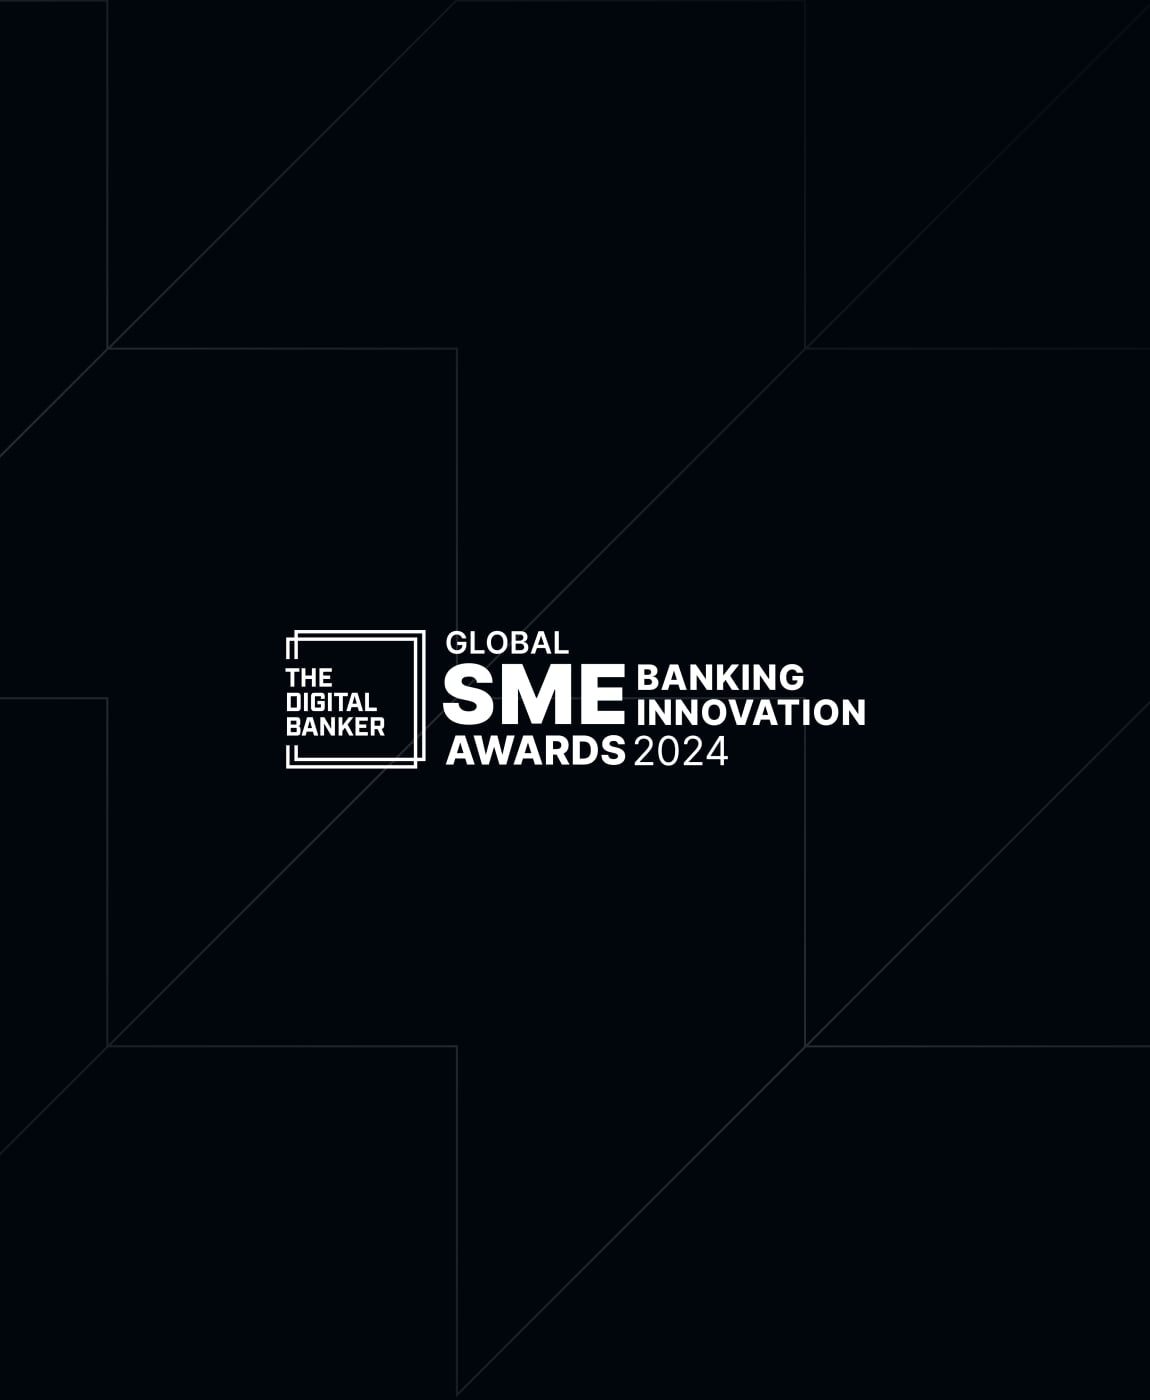 Memo Bank has been recognized in the “Best API Initiative” category by The Digital Banker